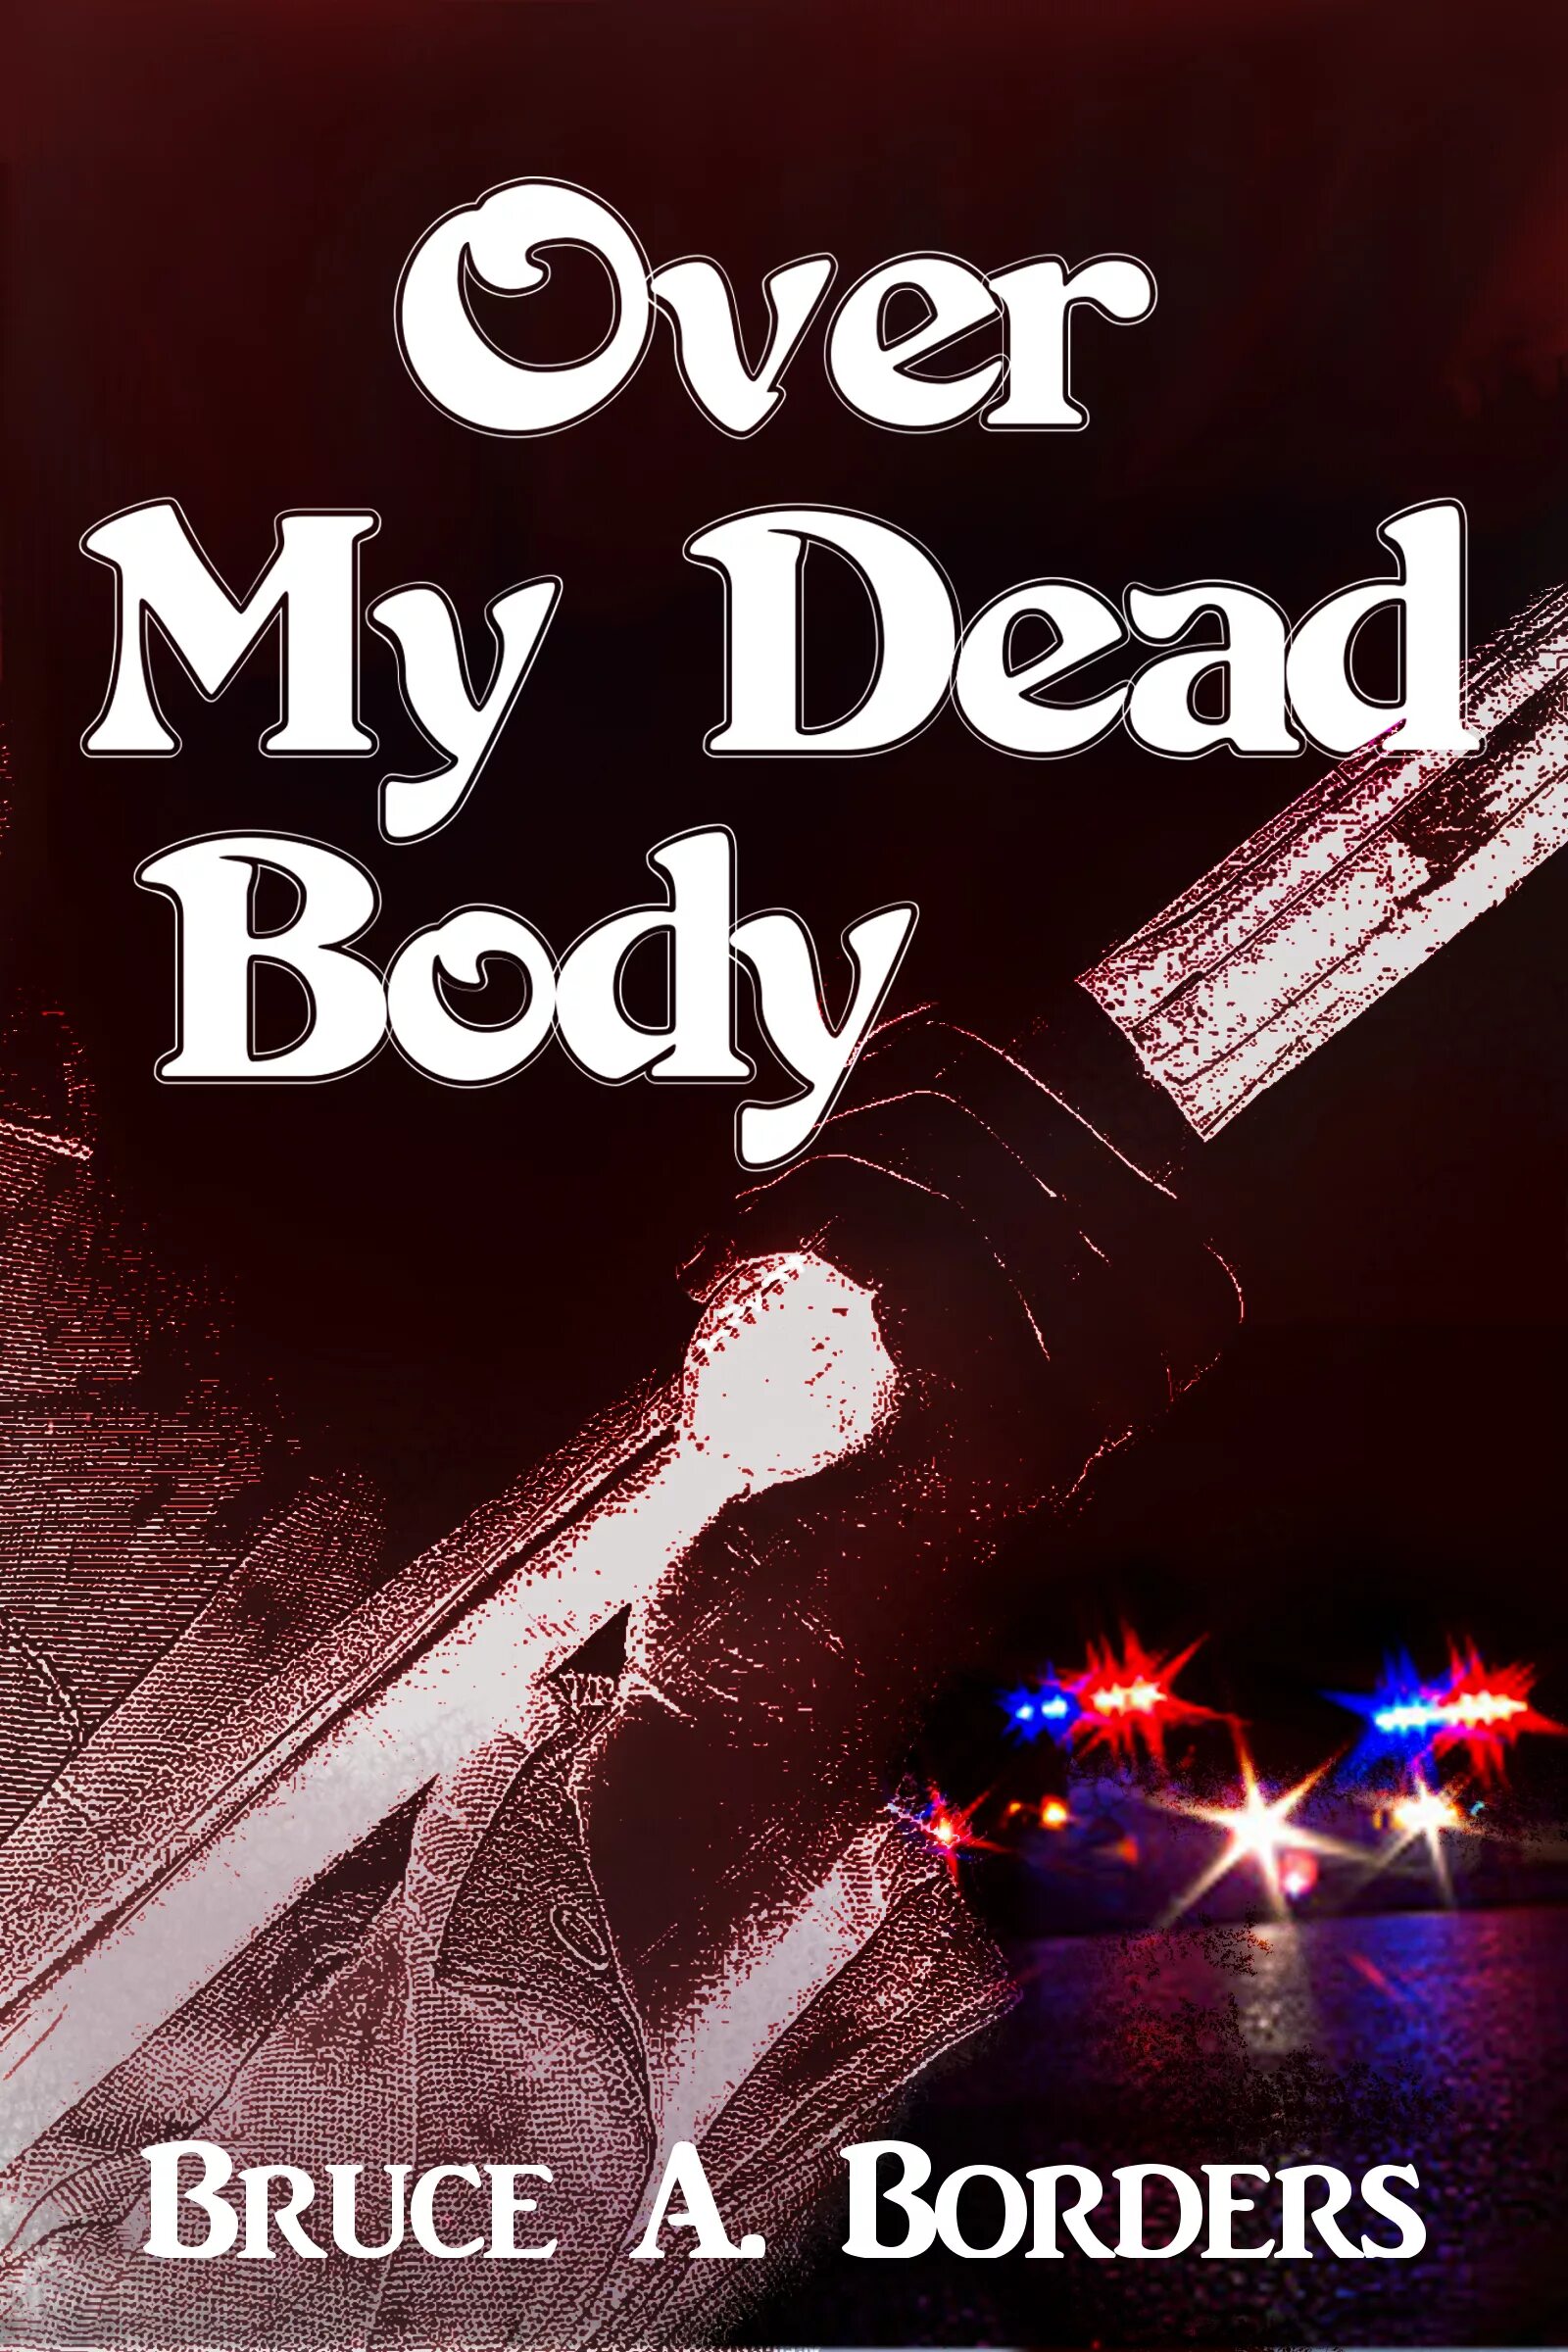 Over dead. Over my Dead body. Dead my. Tony Mills - 2015 - over my Dead body.